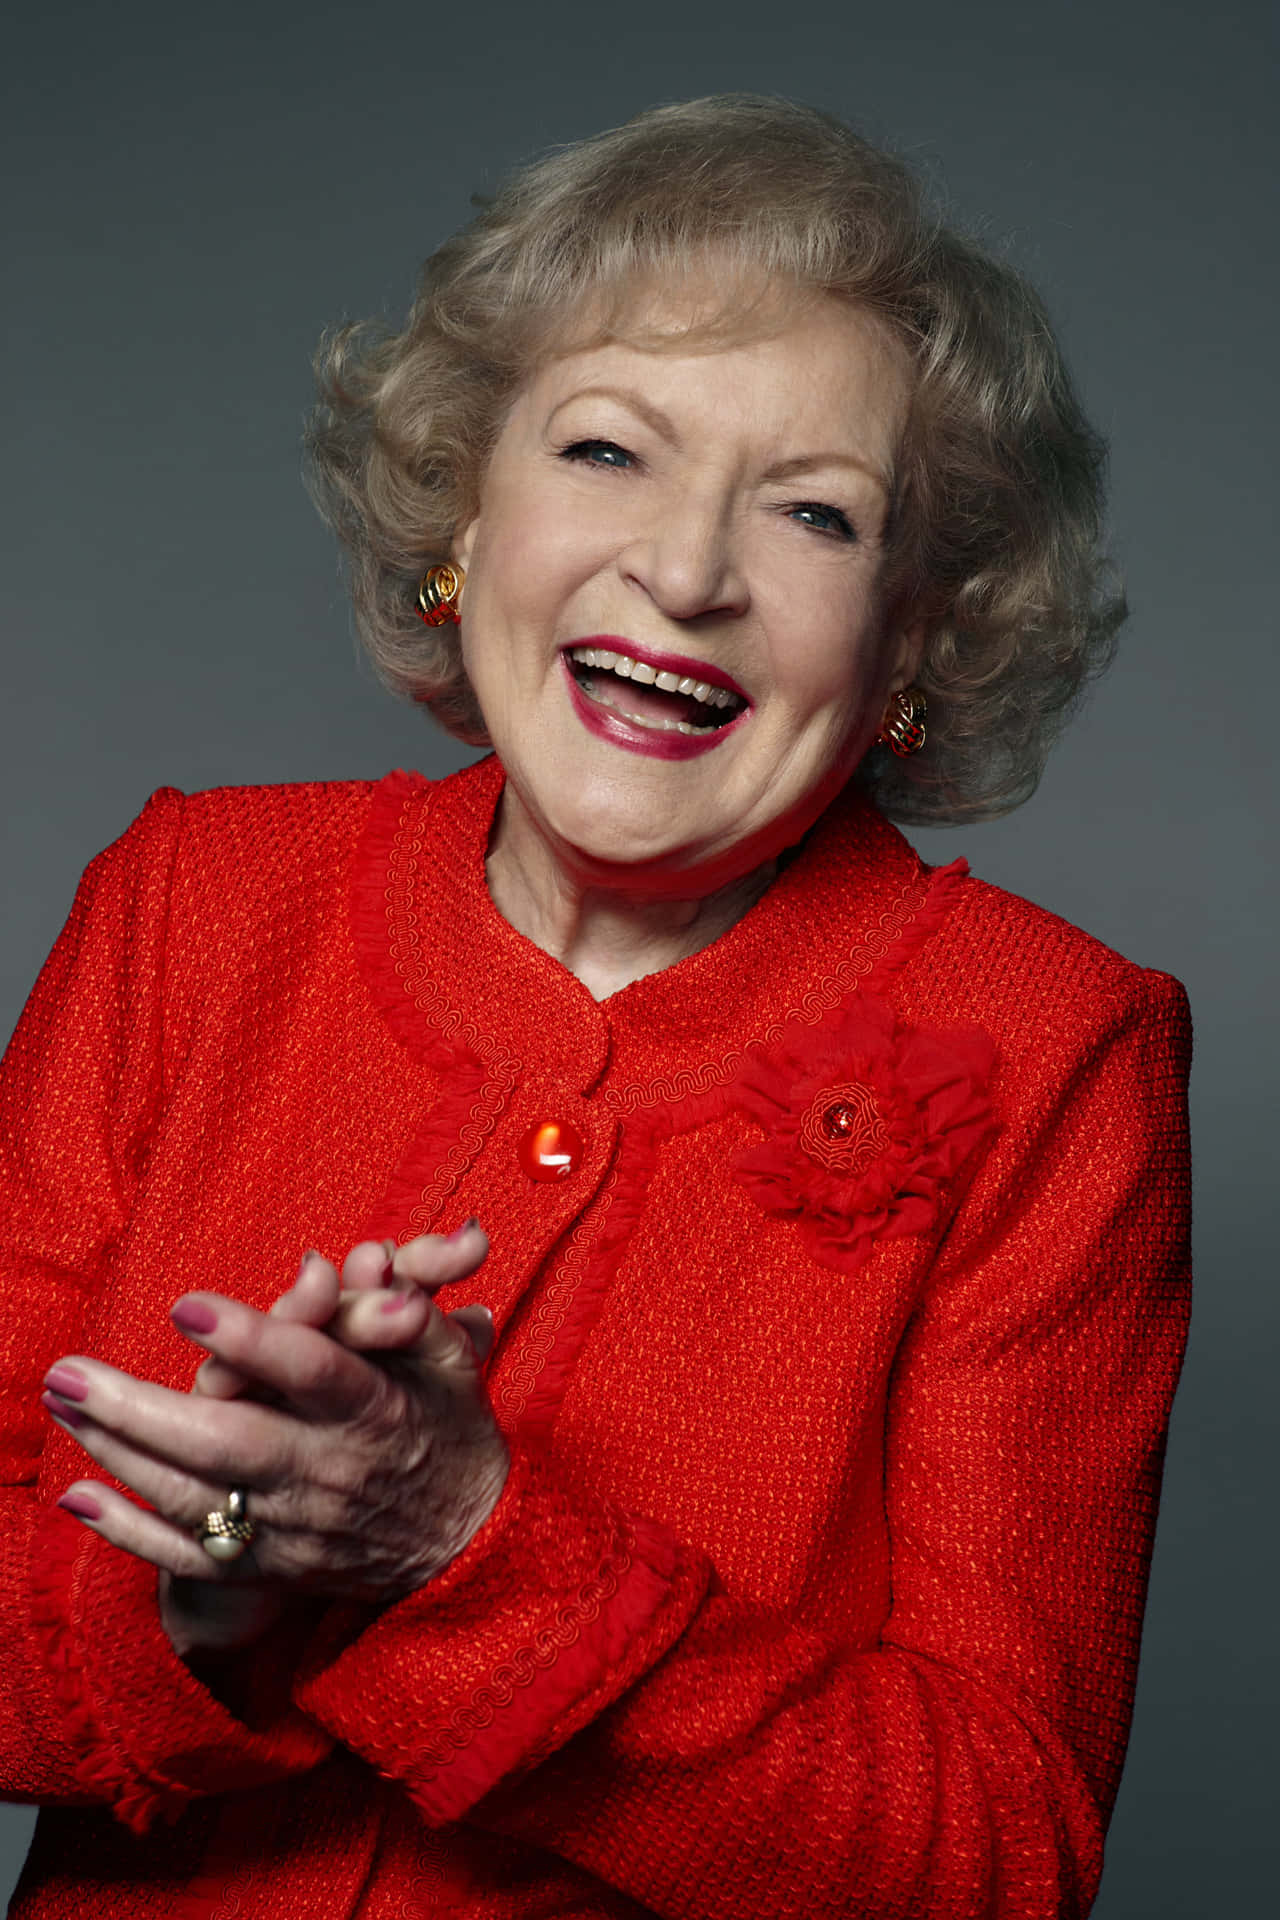 Betty White - A Woman In A Red Jacket Clapping